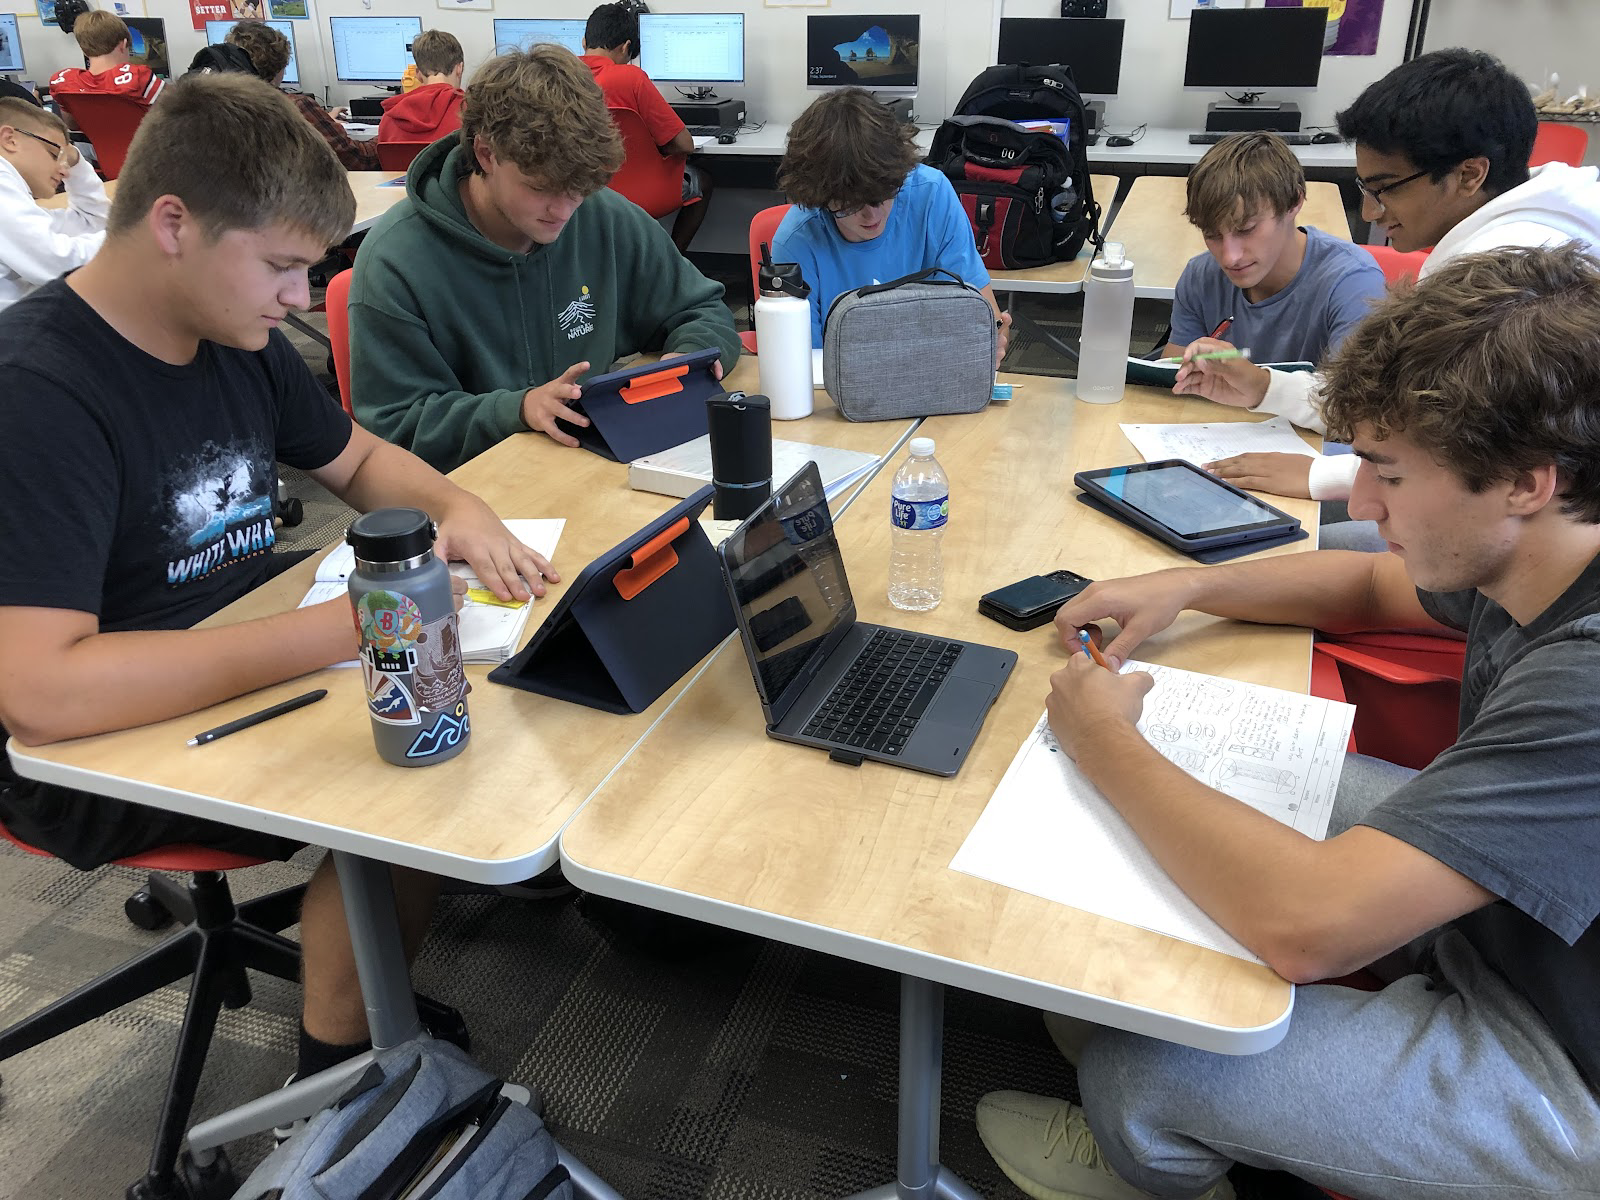 (From the left to right) Seniors Gavin Siems, Cole Gale, Christian Banks, Cameron Kraiger, Manas Kamath and Joey Schmitz work on their collaborative project with Endress+Hauser in Engineering Design and Development.